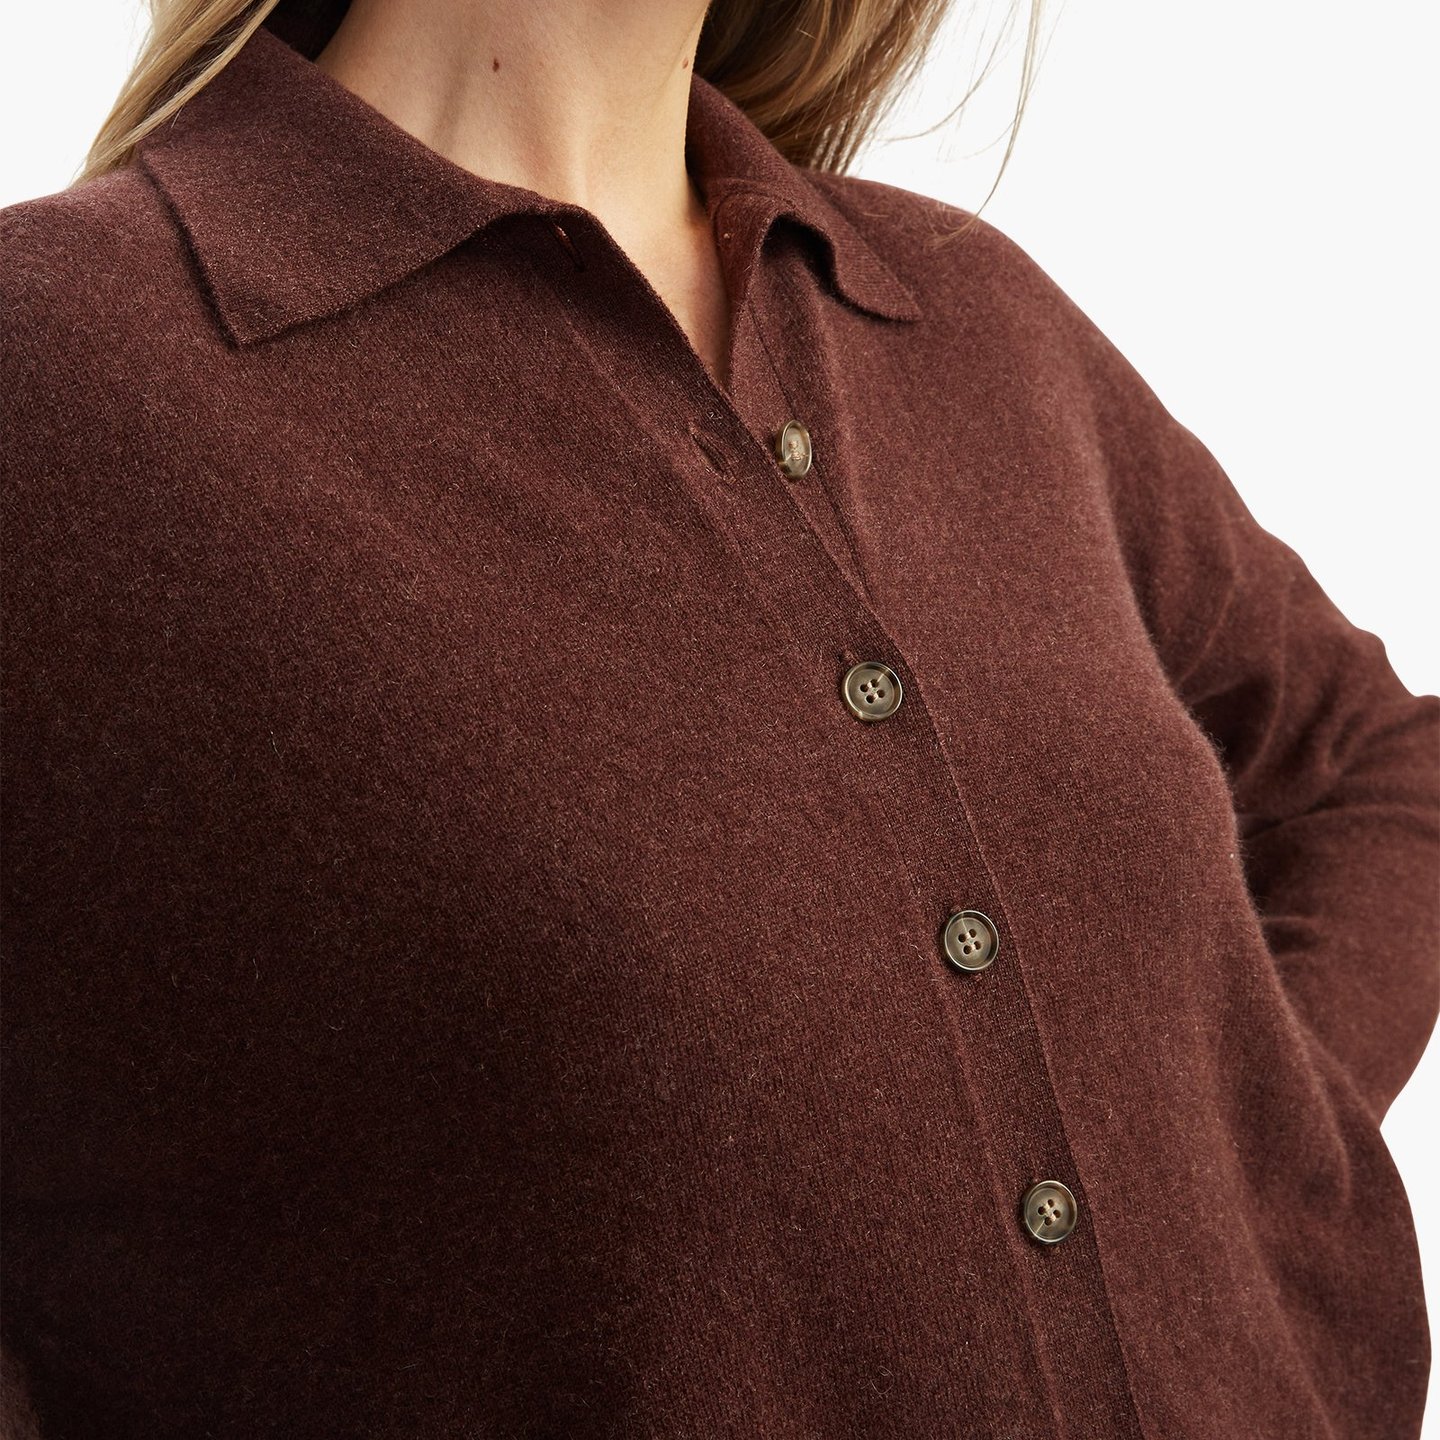 NWET000800_Cashmere_Button_Up_Chocolate_Brown_012_1440x.jpg